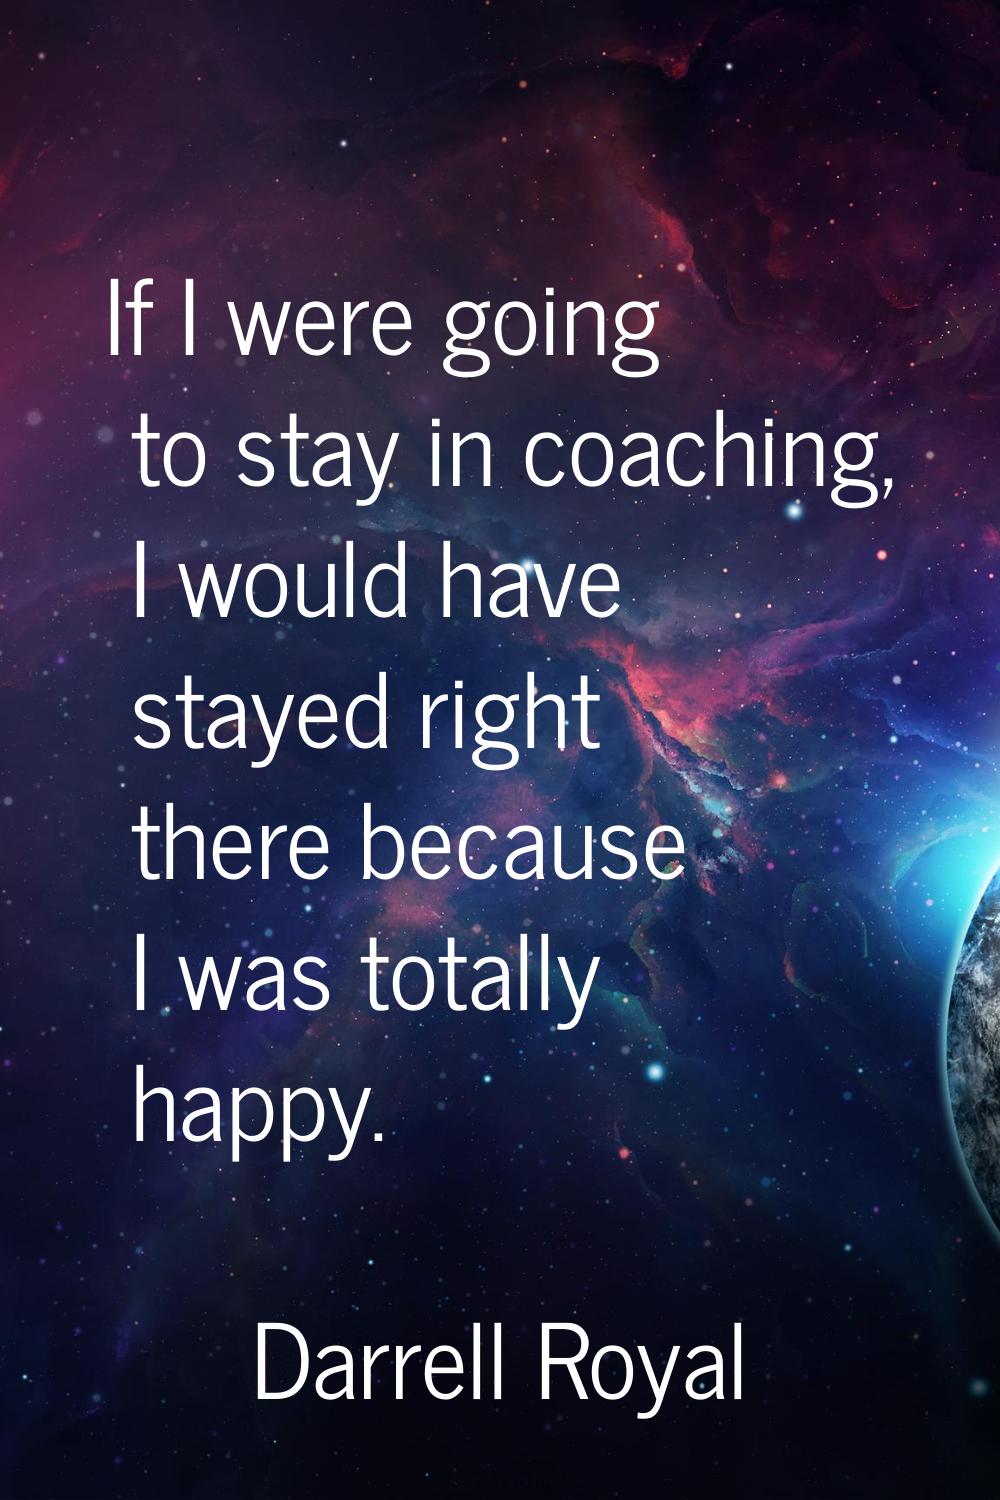 If I were going to stay in coaching, I would have stayed right there because I was totally happy.